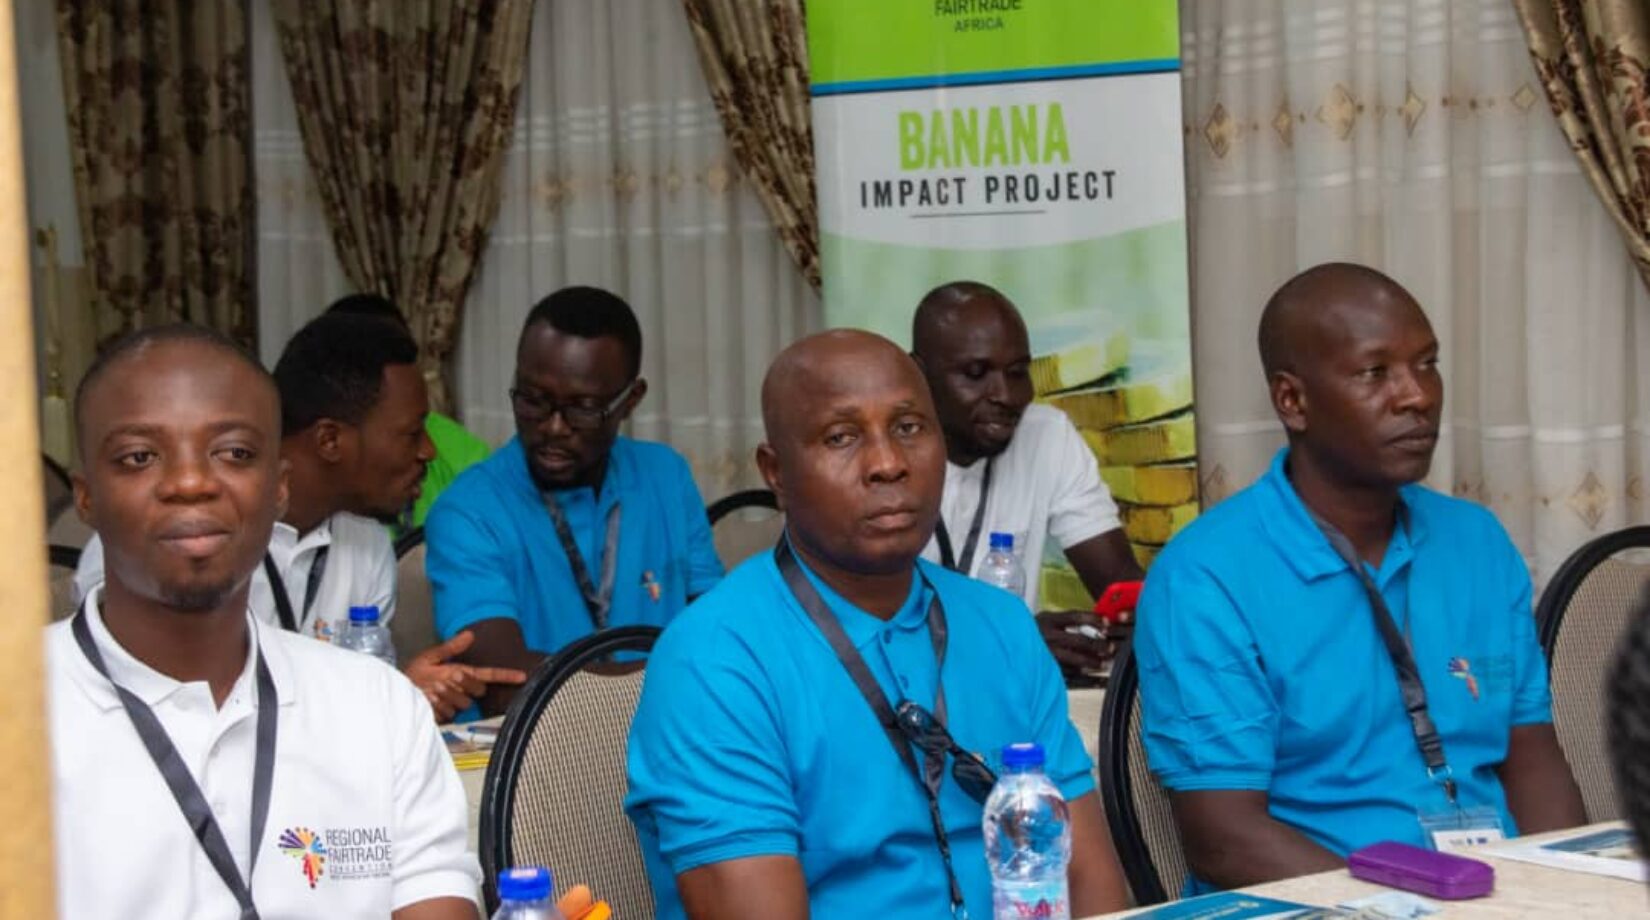 Fairtrade Africa holds West Africa Regional Convention